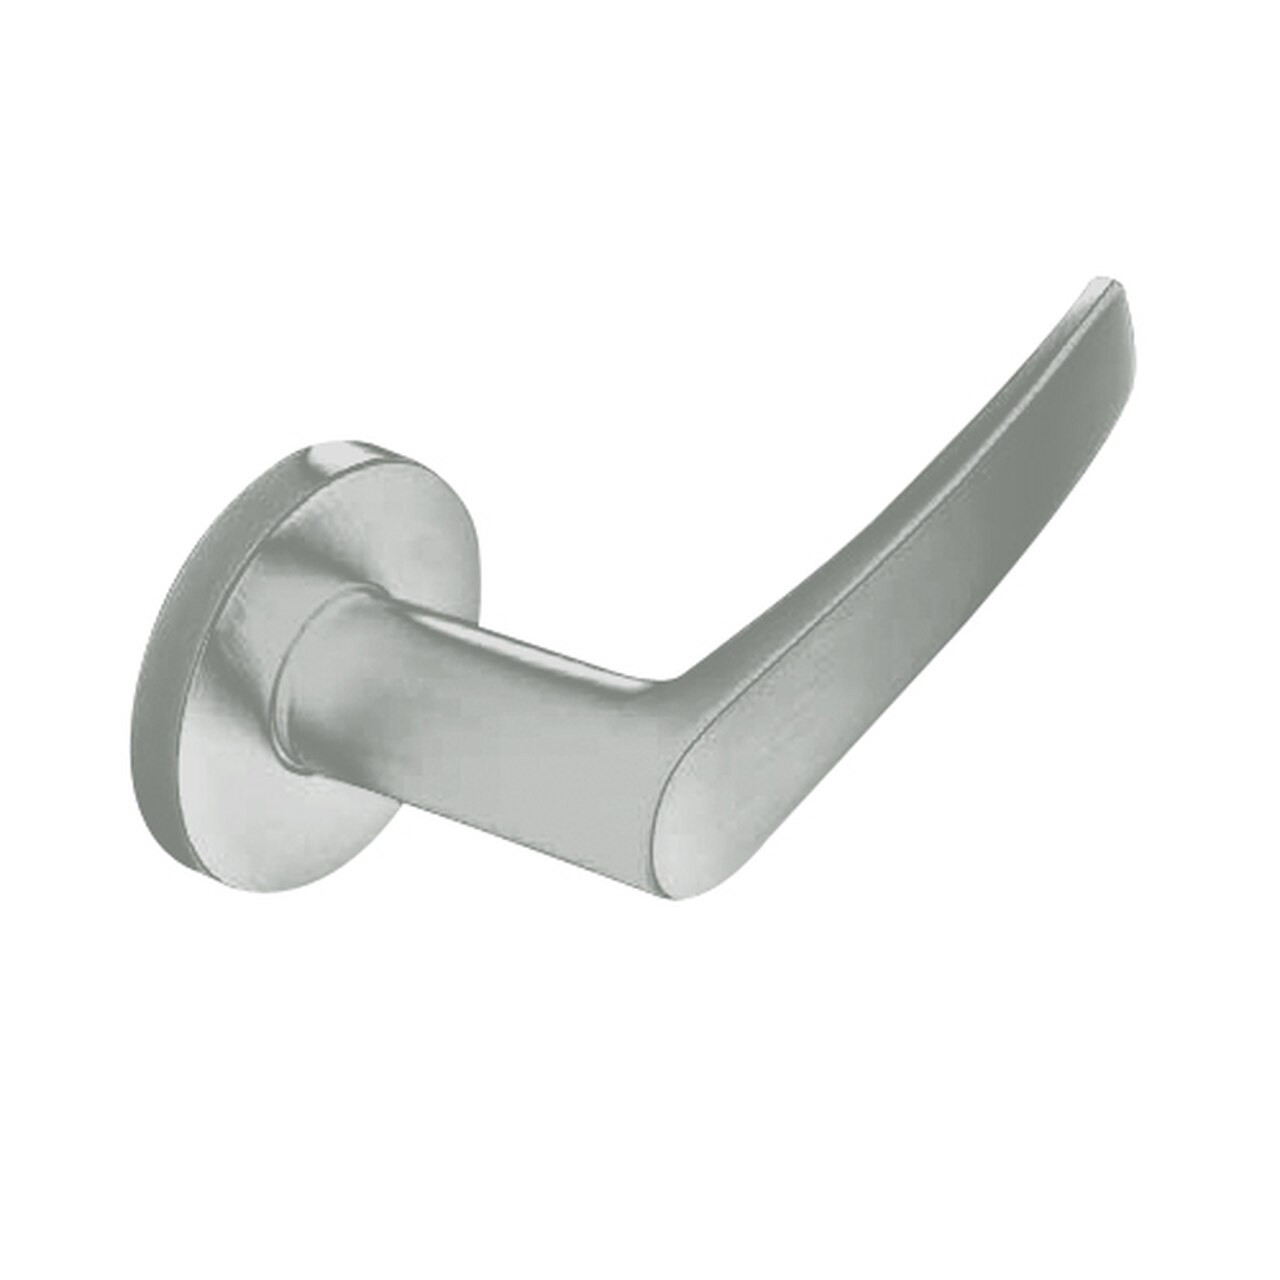 ML2030-ASF-619-M31 Corbin Russwin ML2000 Series Mortise Privacy Locksets with Armstrong Lever in Satin Nickel